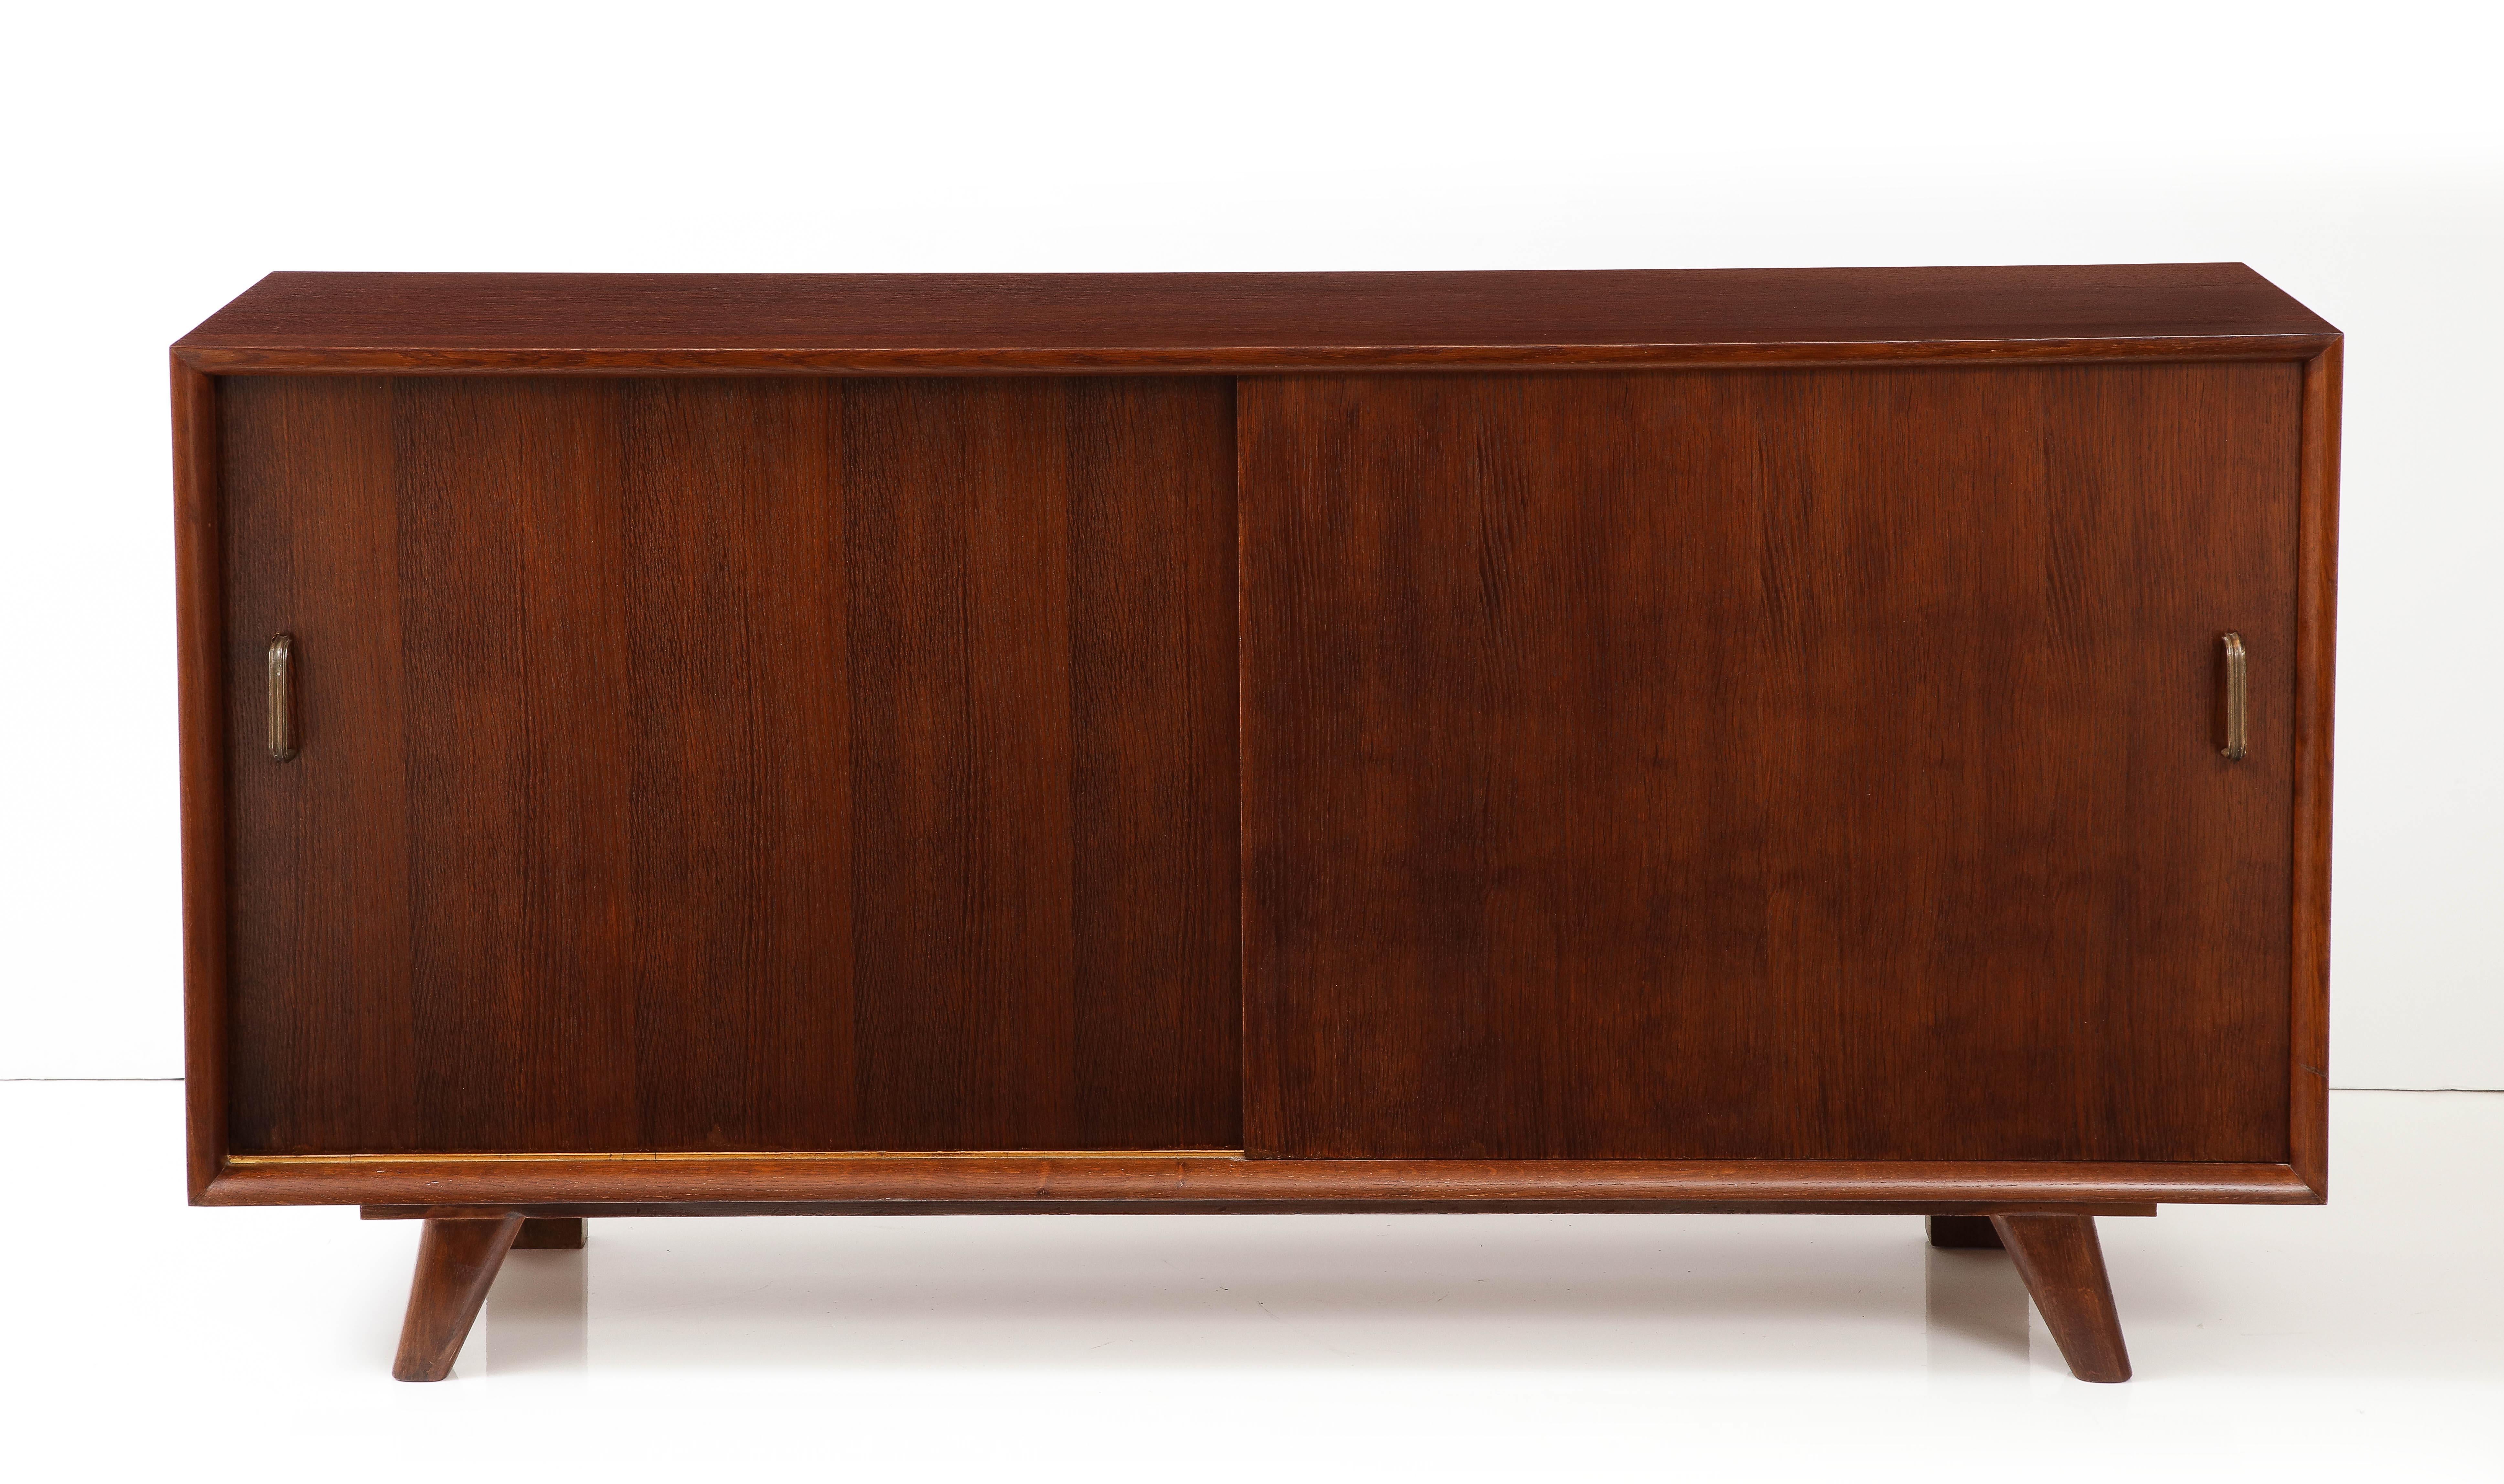 Mid-Century Modern French Oak Sideboard with Sliding Doors & Shelves, 1950's For Sale